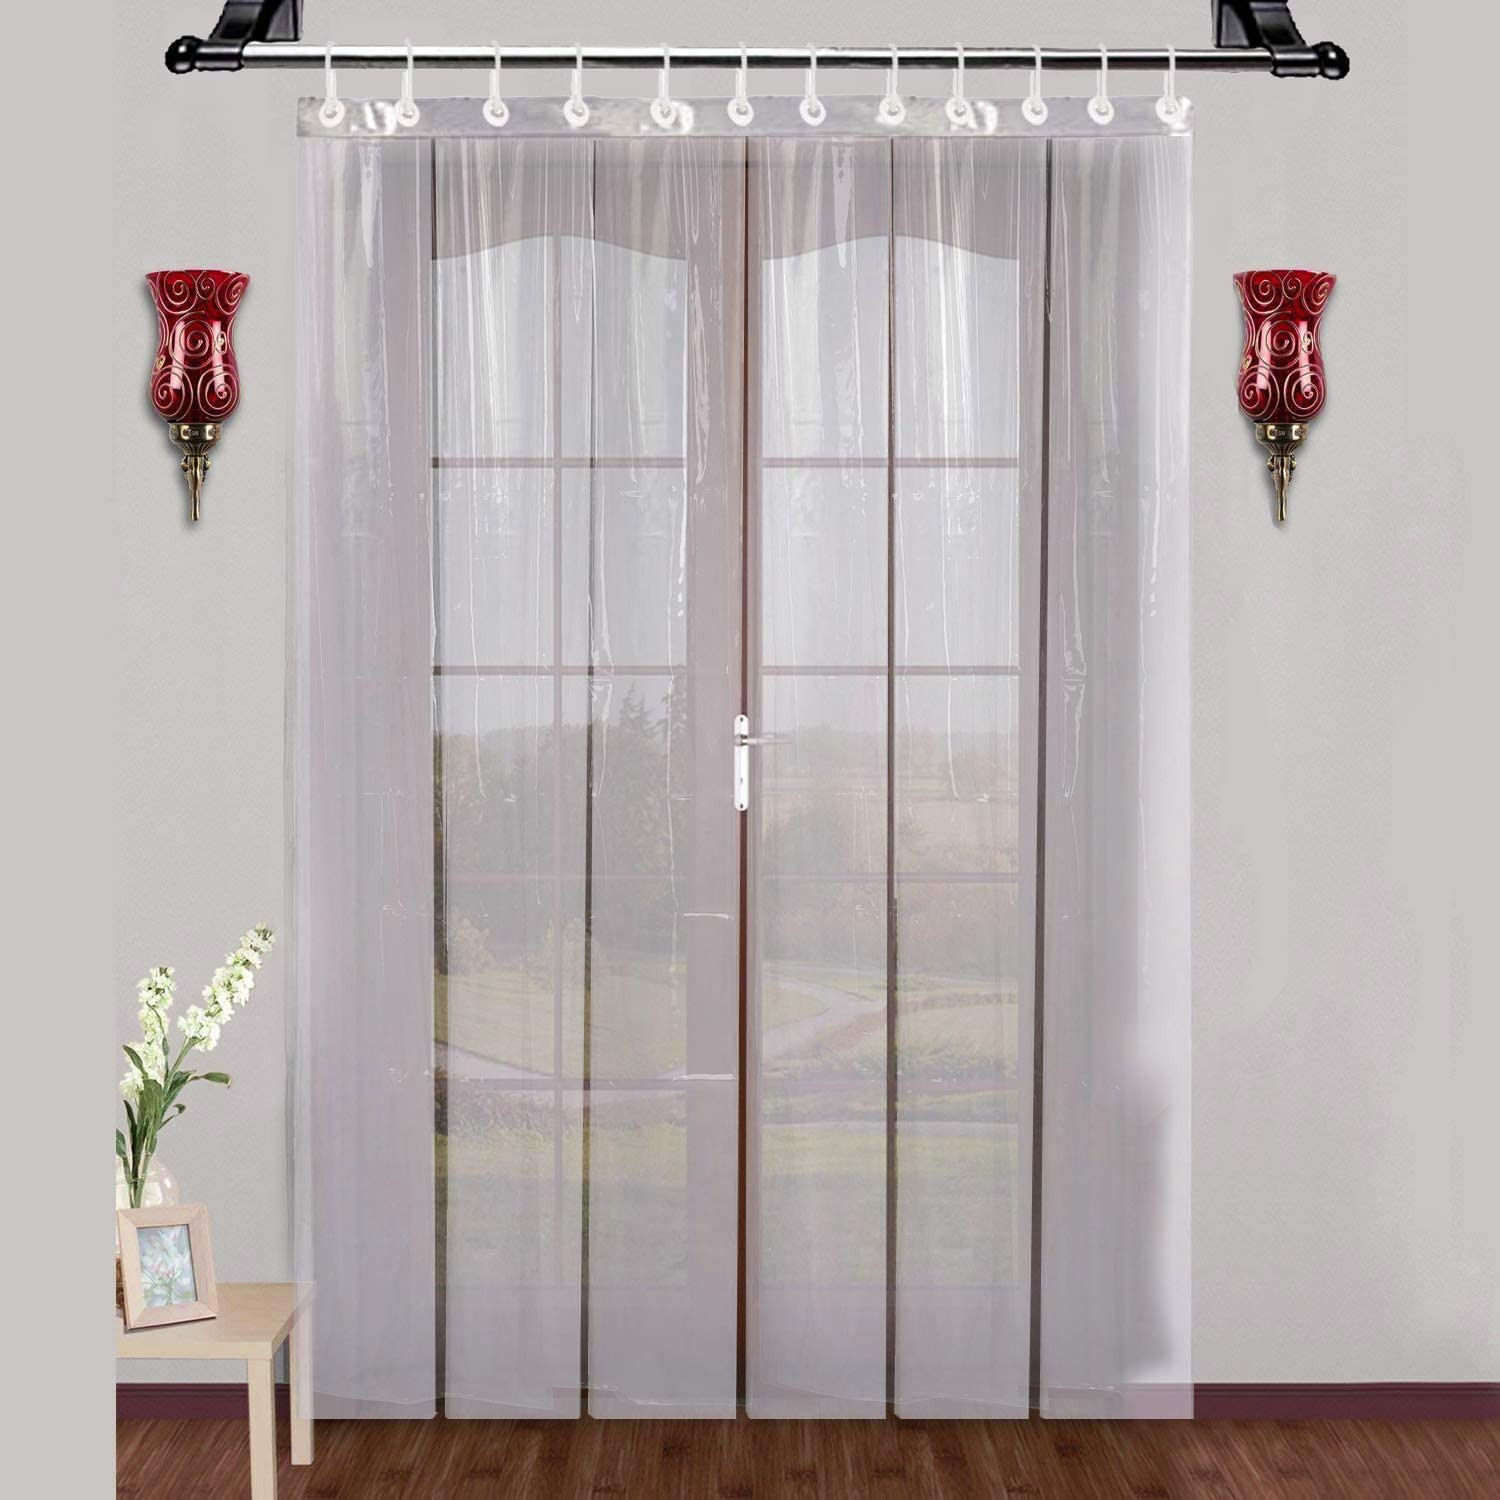 Kuber Industries .50MM Pack Of 1| Rings AC Curtain | PVC 6 Strips AC Curtain | Window Curtain for Bathroom | Curtains for Door | Waterproof Shower Curtain | 9 Feet| Transparent